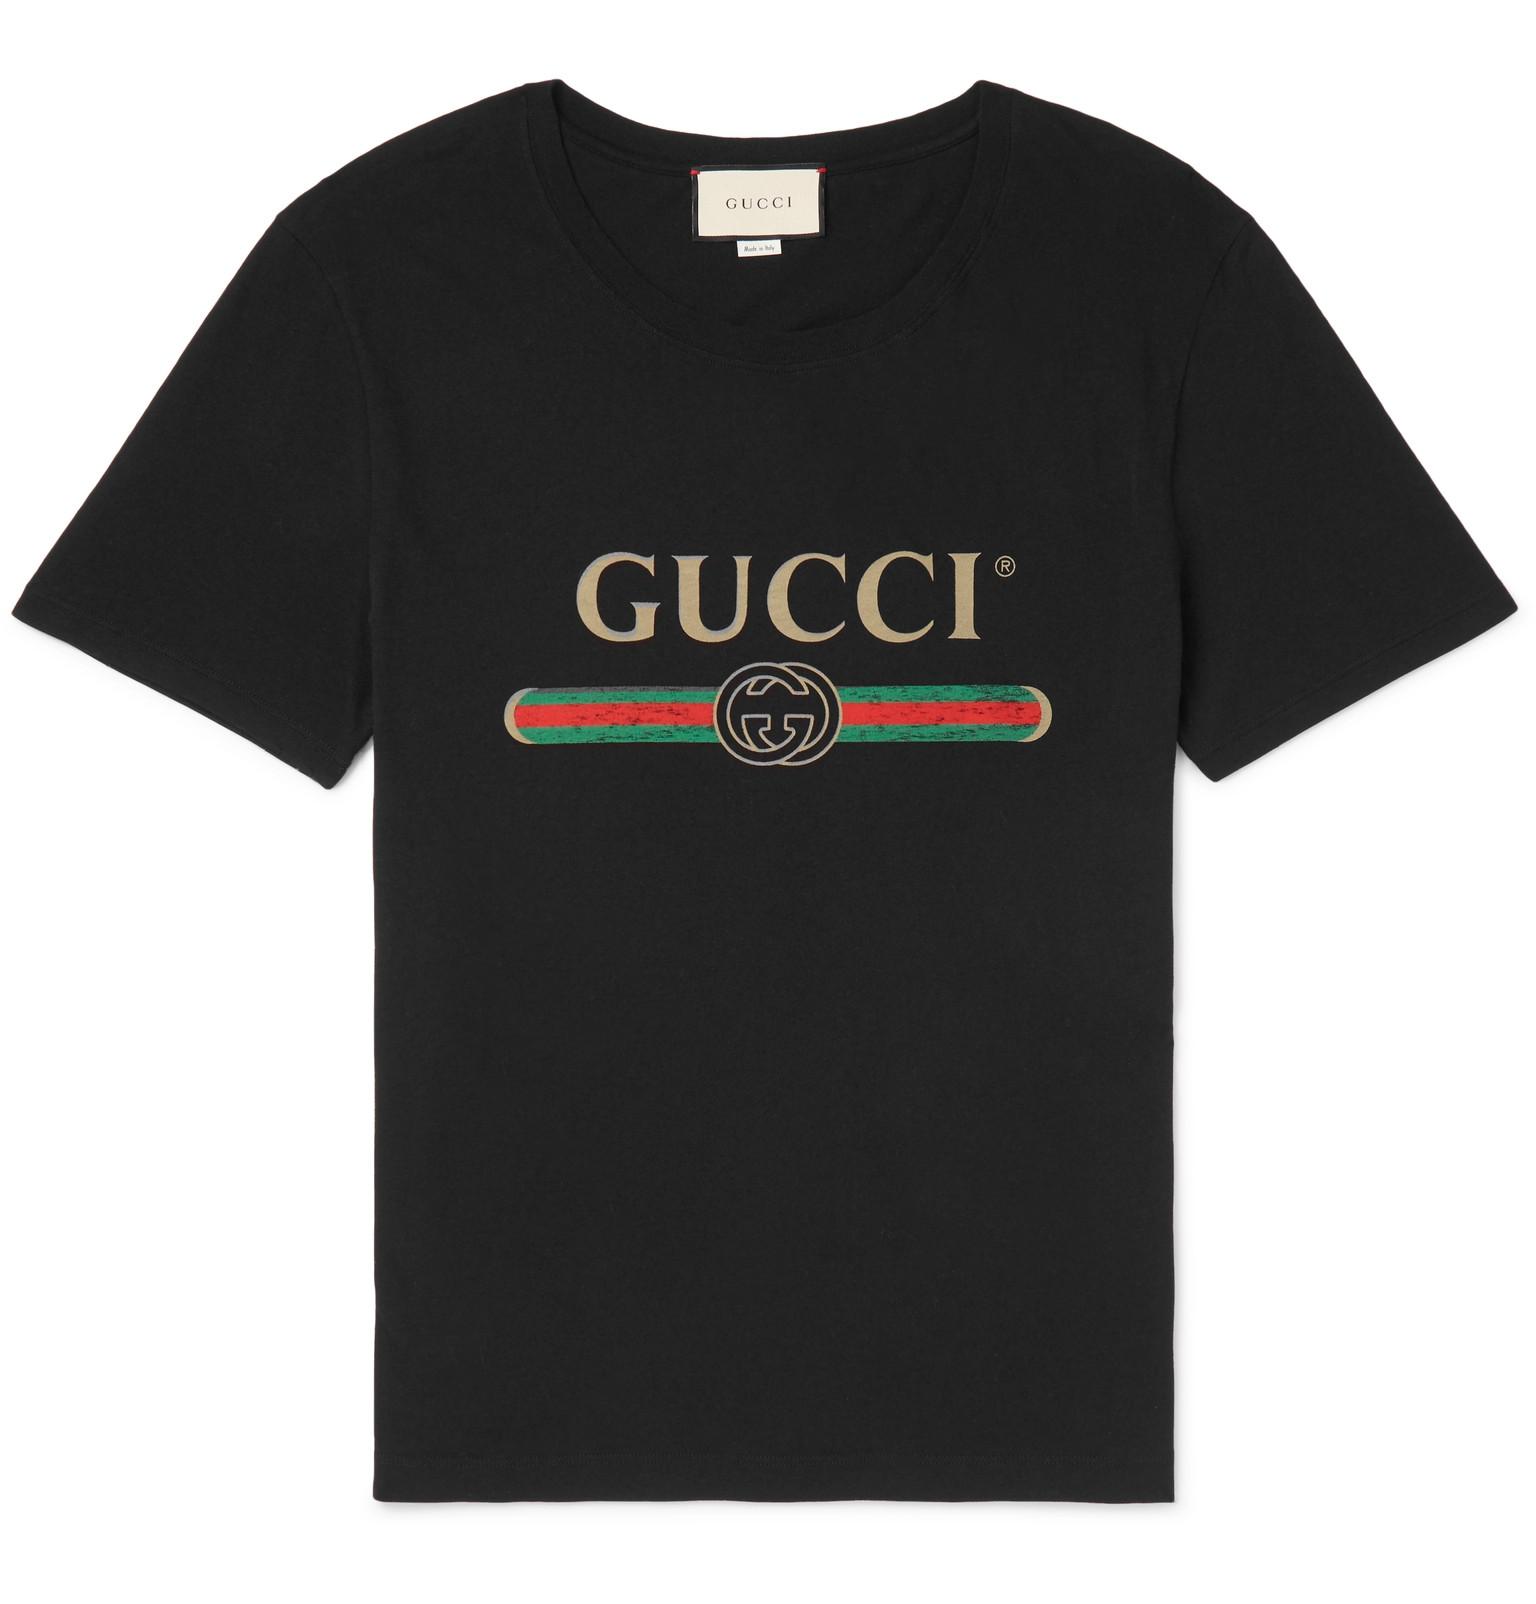 Gucci Fake Logo Print Cotton T Shirt in Black for Men - Save 58% - Lyst